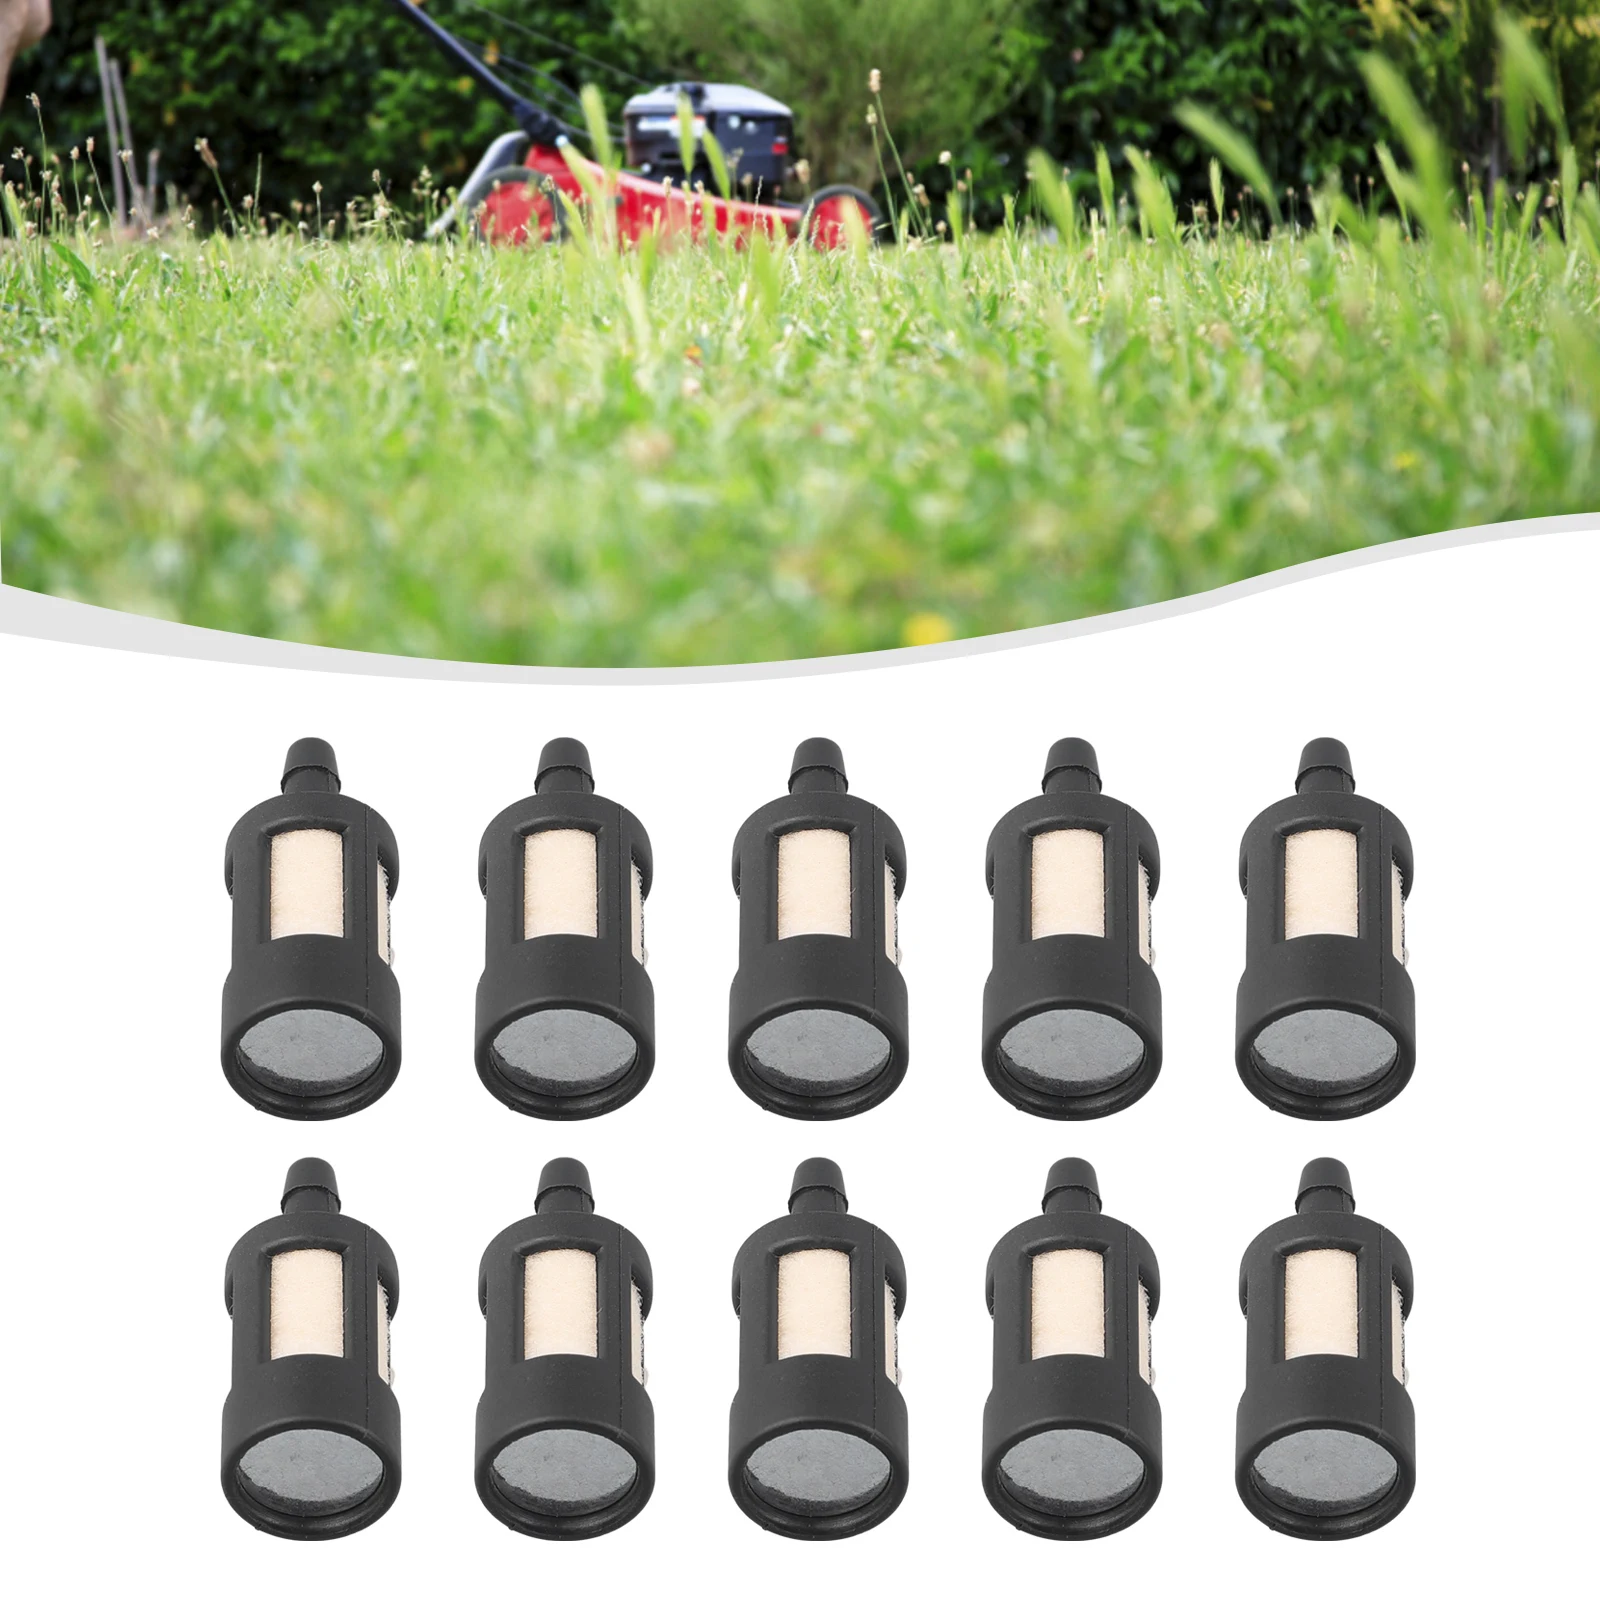 

Set General Fuel Filter 10PCS Spare Parts Accessories Chainsaw For Gasoline Machinery Grass Trimmer Kit Replacement Durable